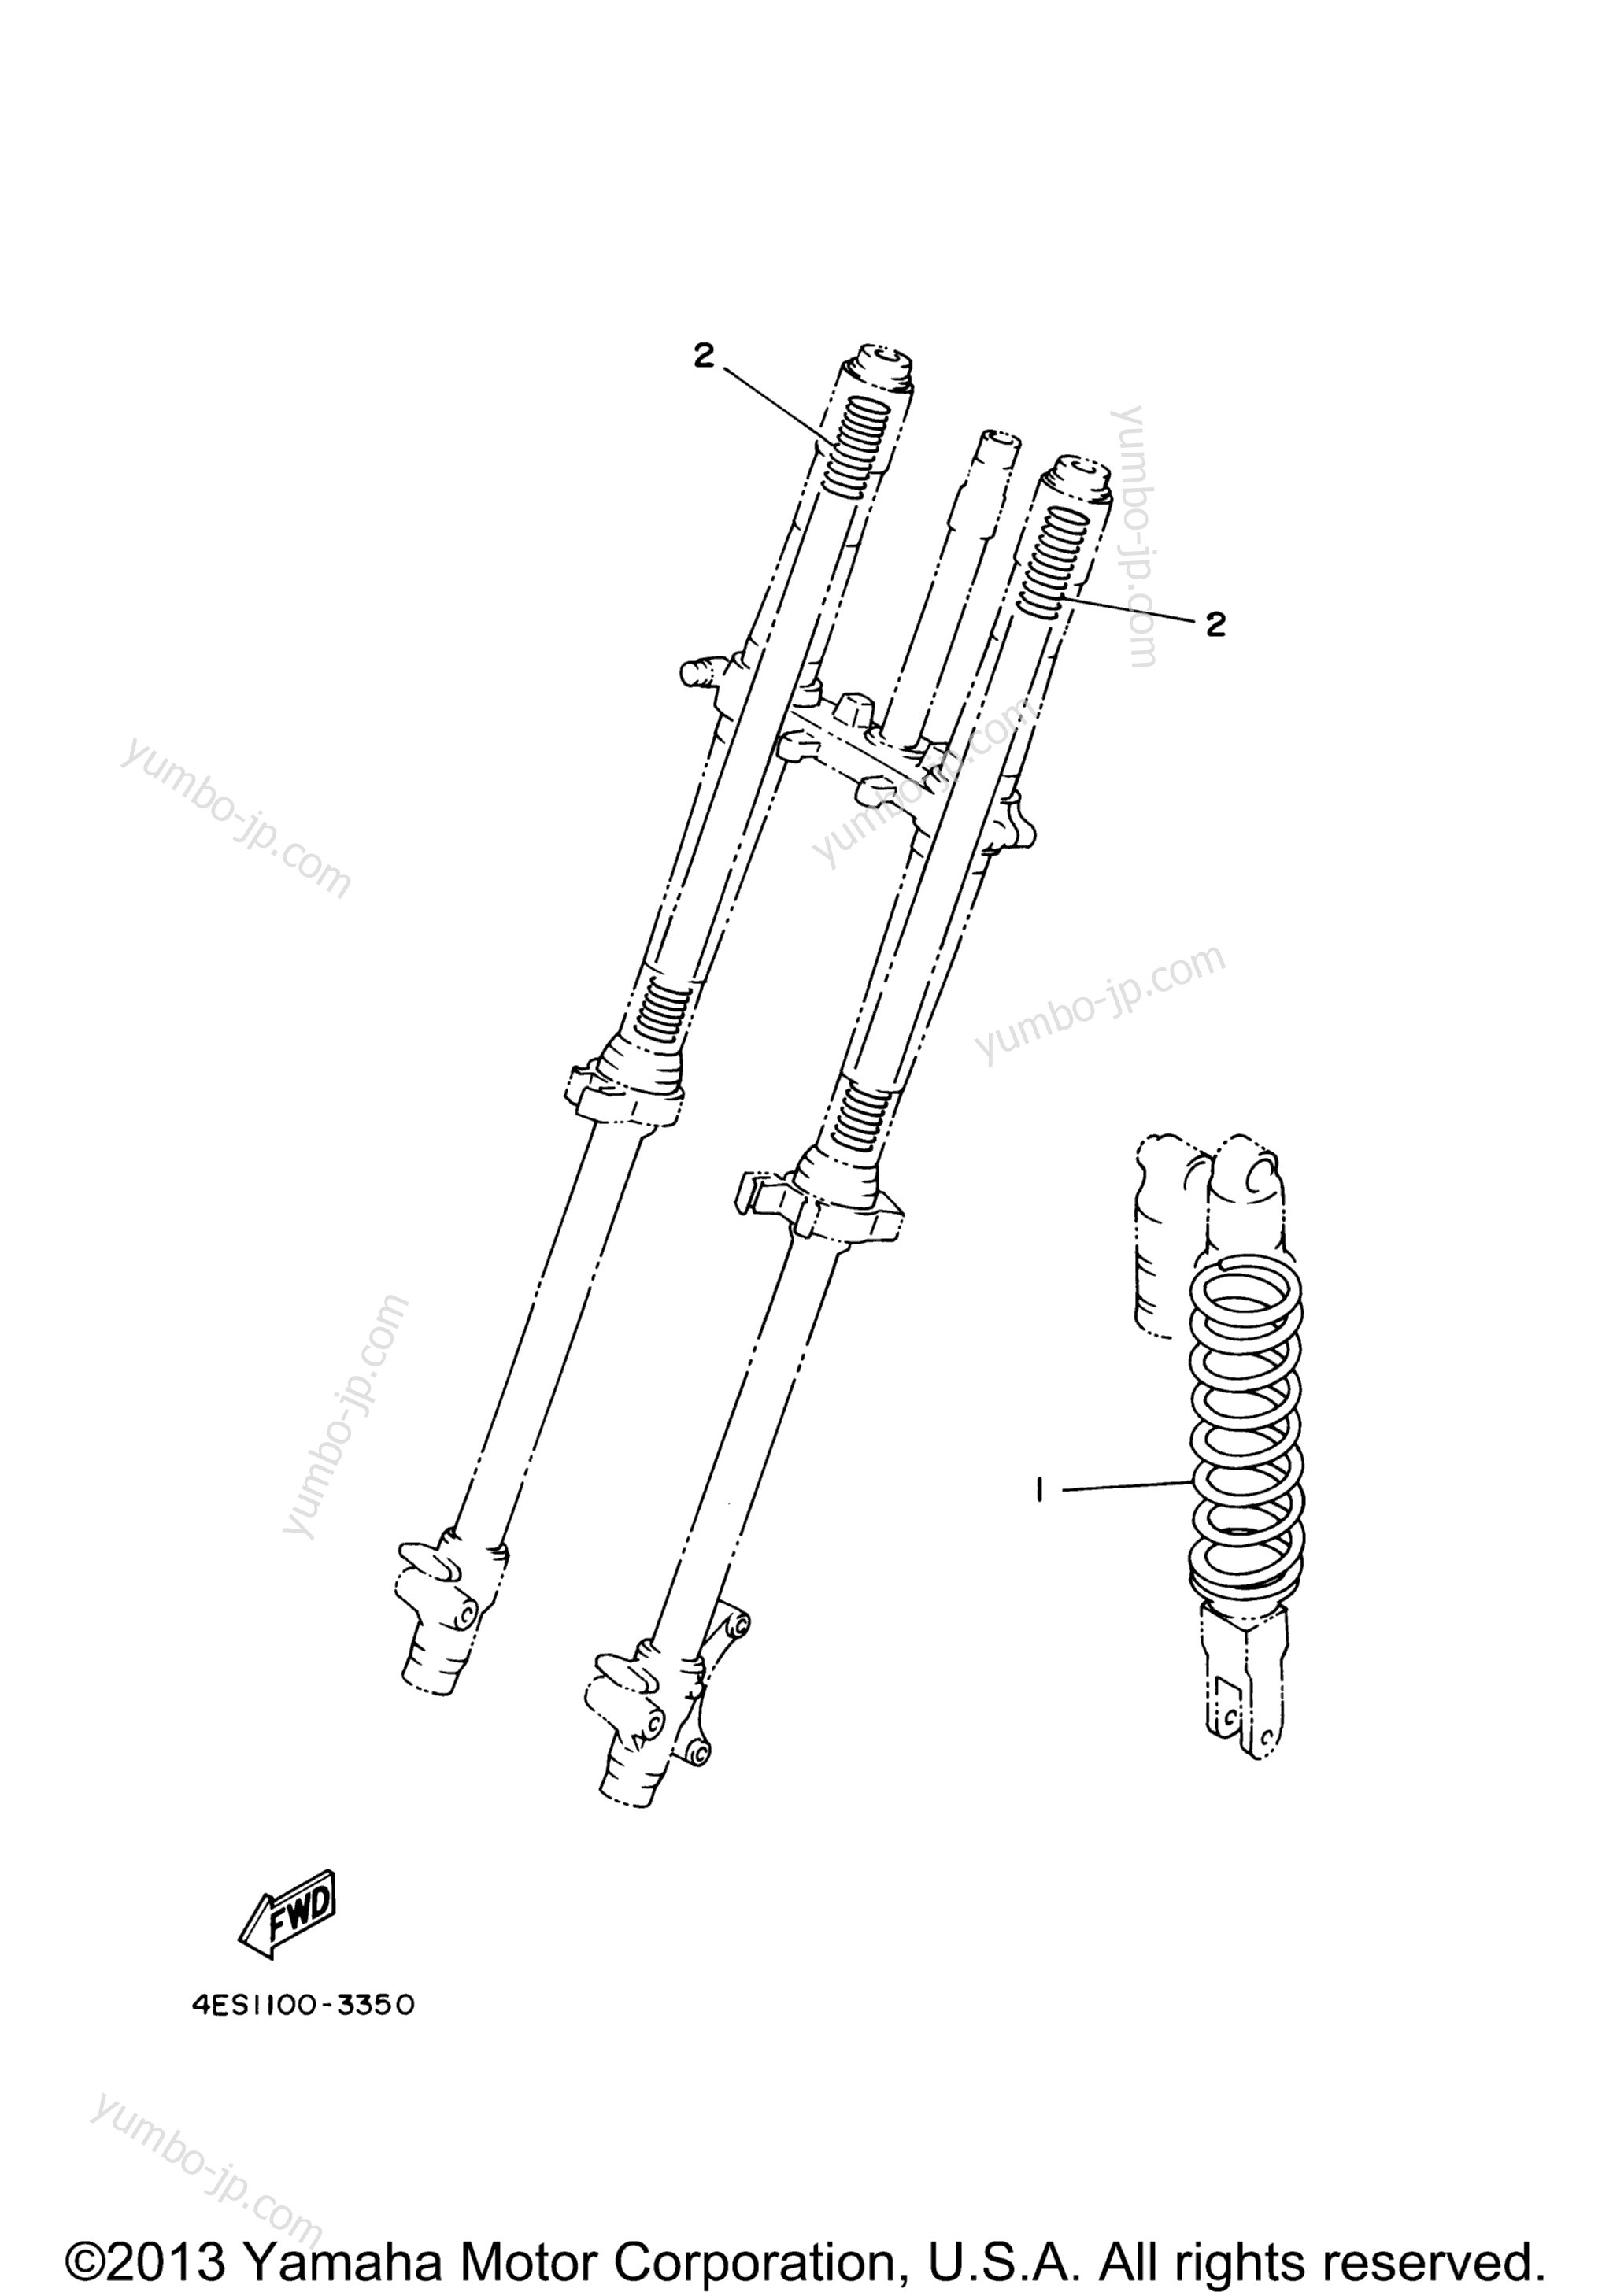 Alternate For Chassis for motorcycles YAMAHA YZ85 (YZ85W1) 2007 year